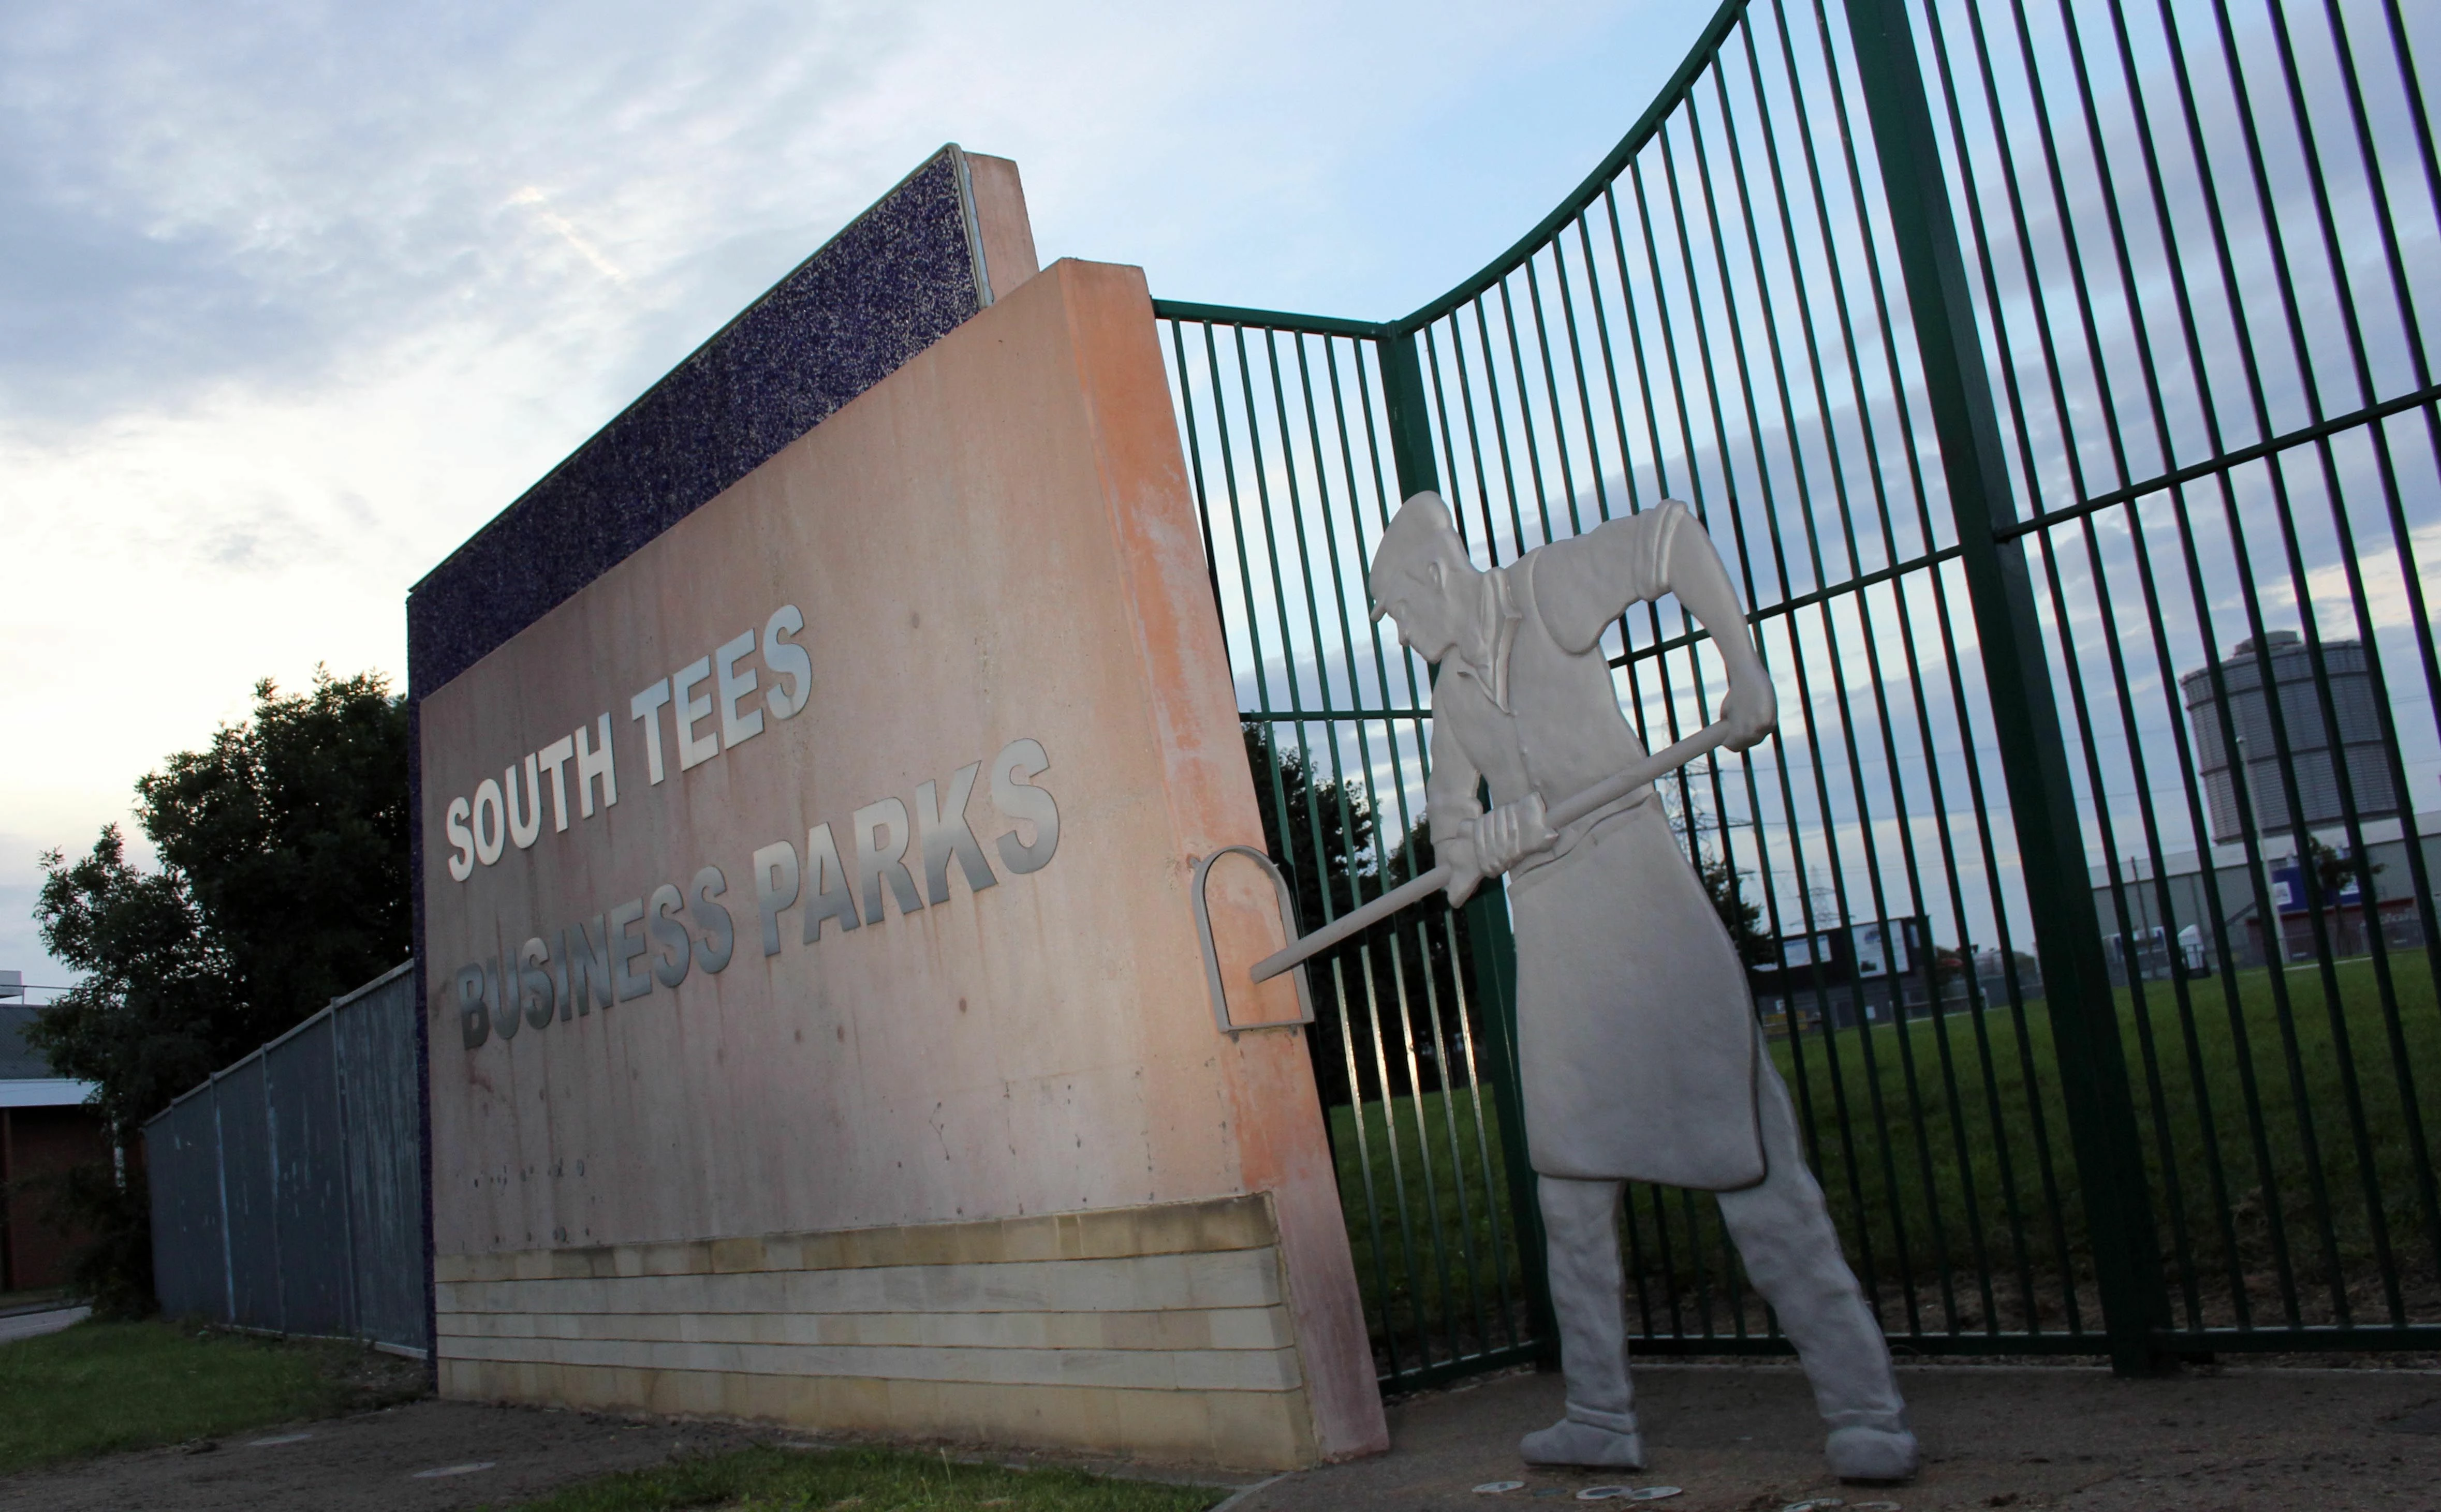 South Tees Business Parks